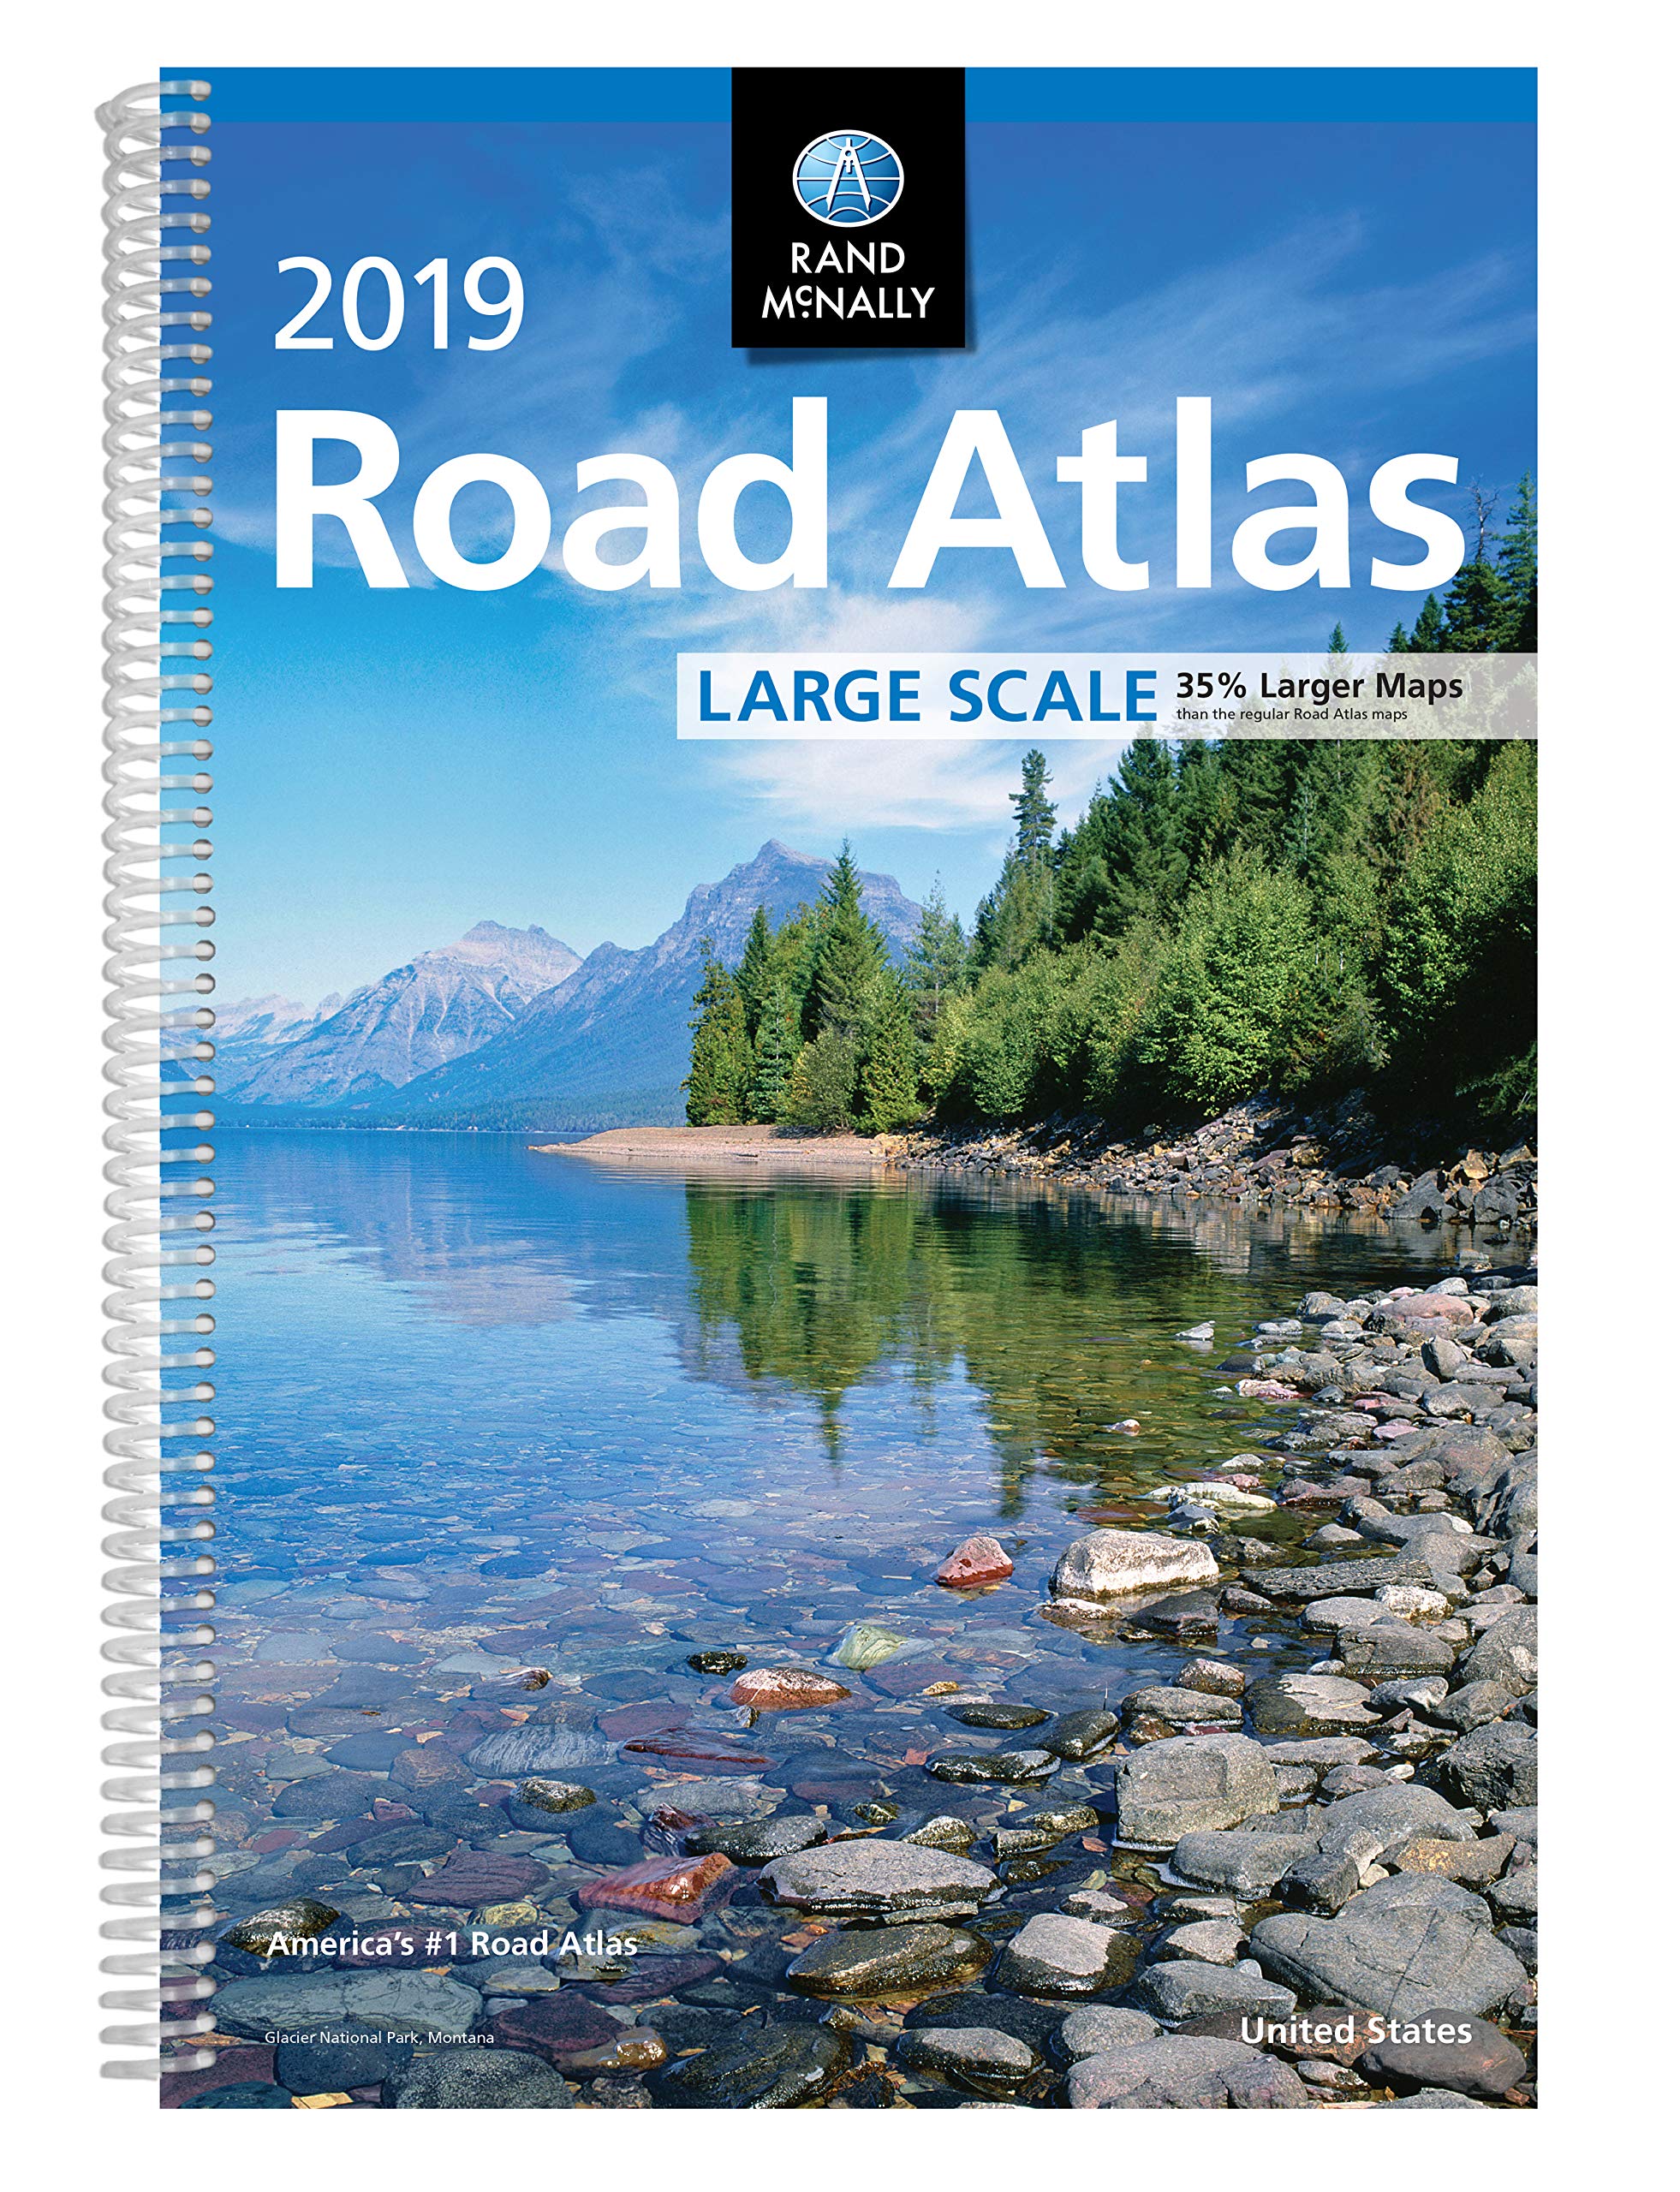 Book Cover 2019 Rand McNally Large Scale Road Atlas